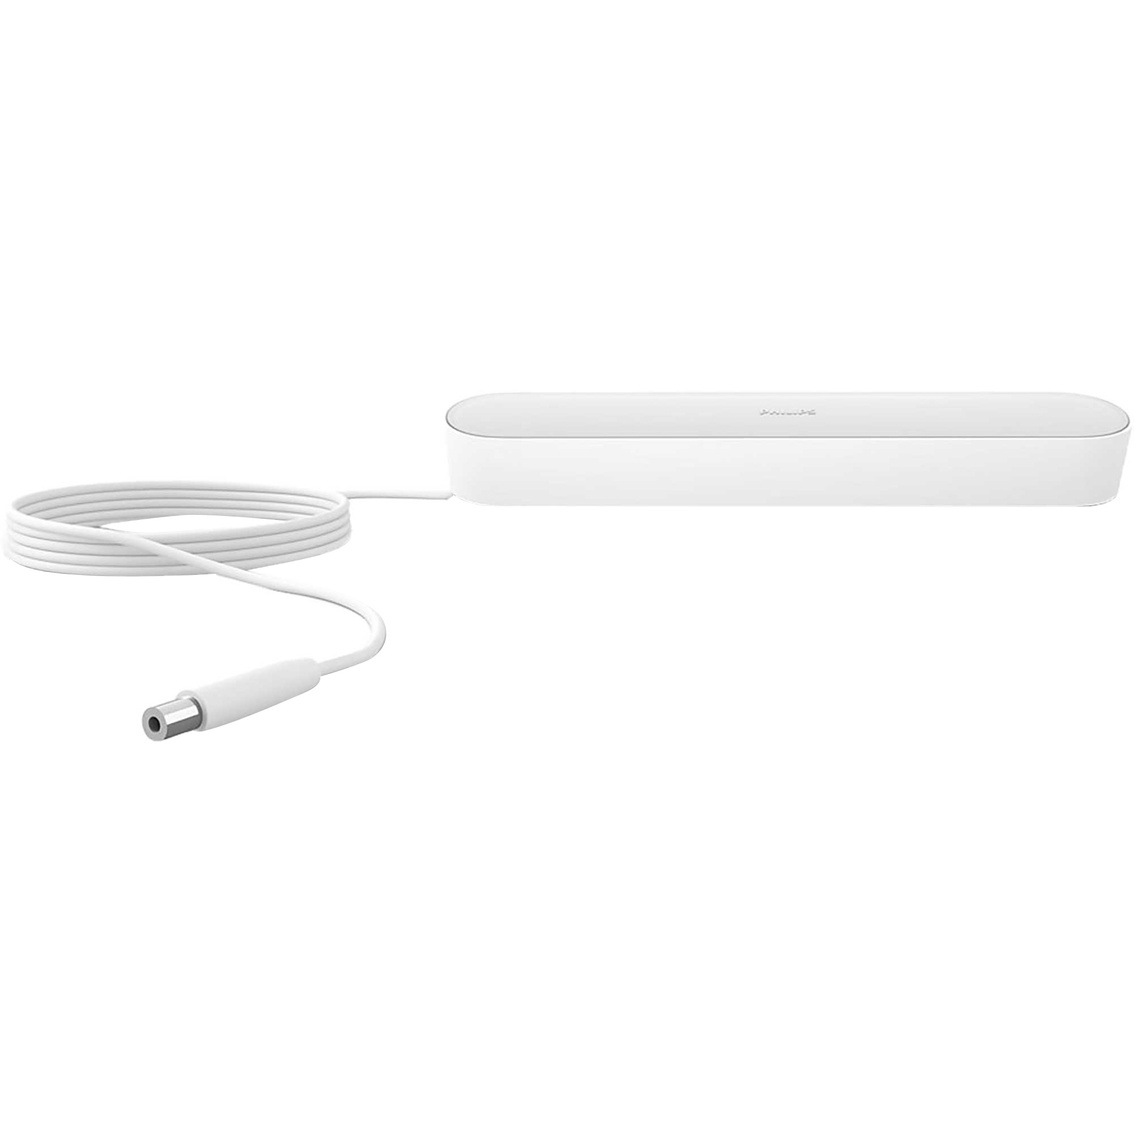 Philips Hue Play Light Bar Double Base Pack, White - Image 4 of 7